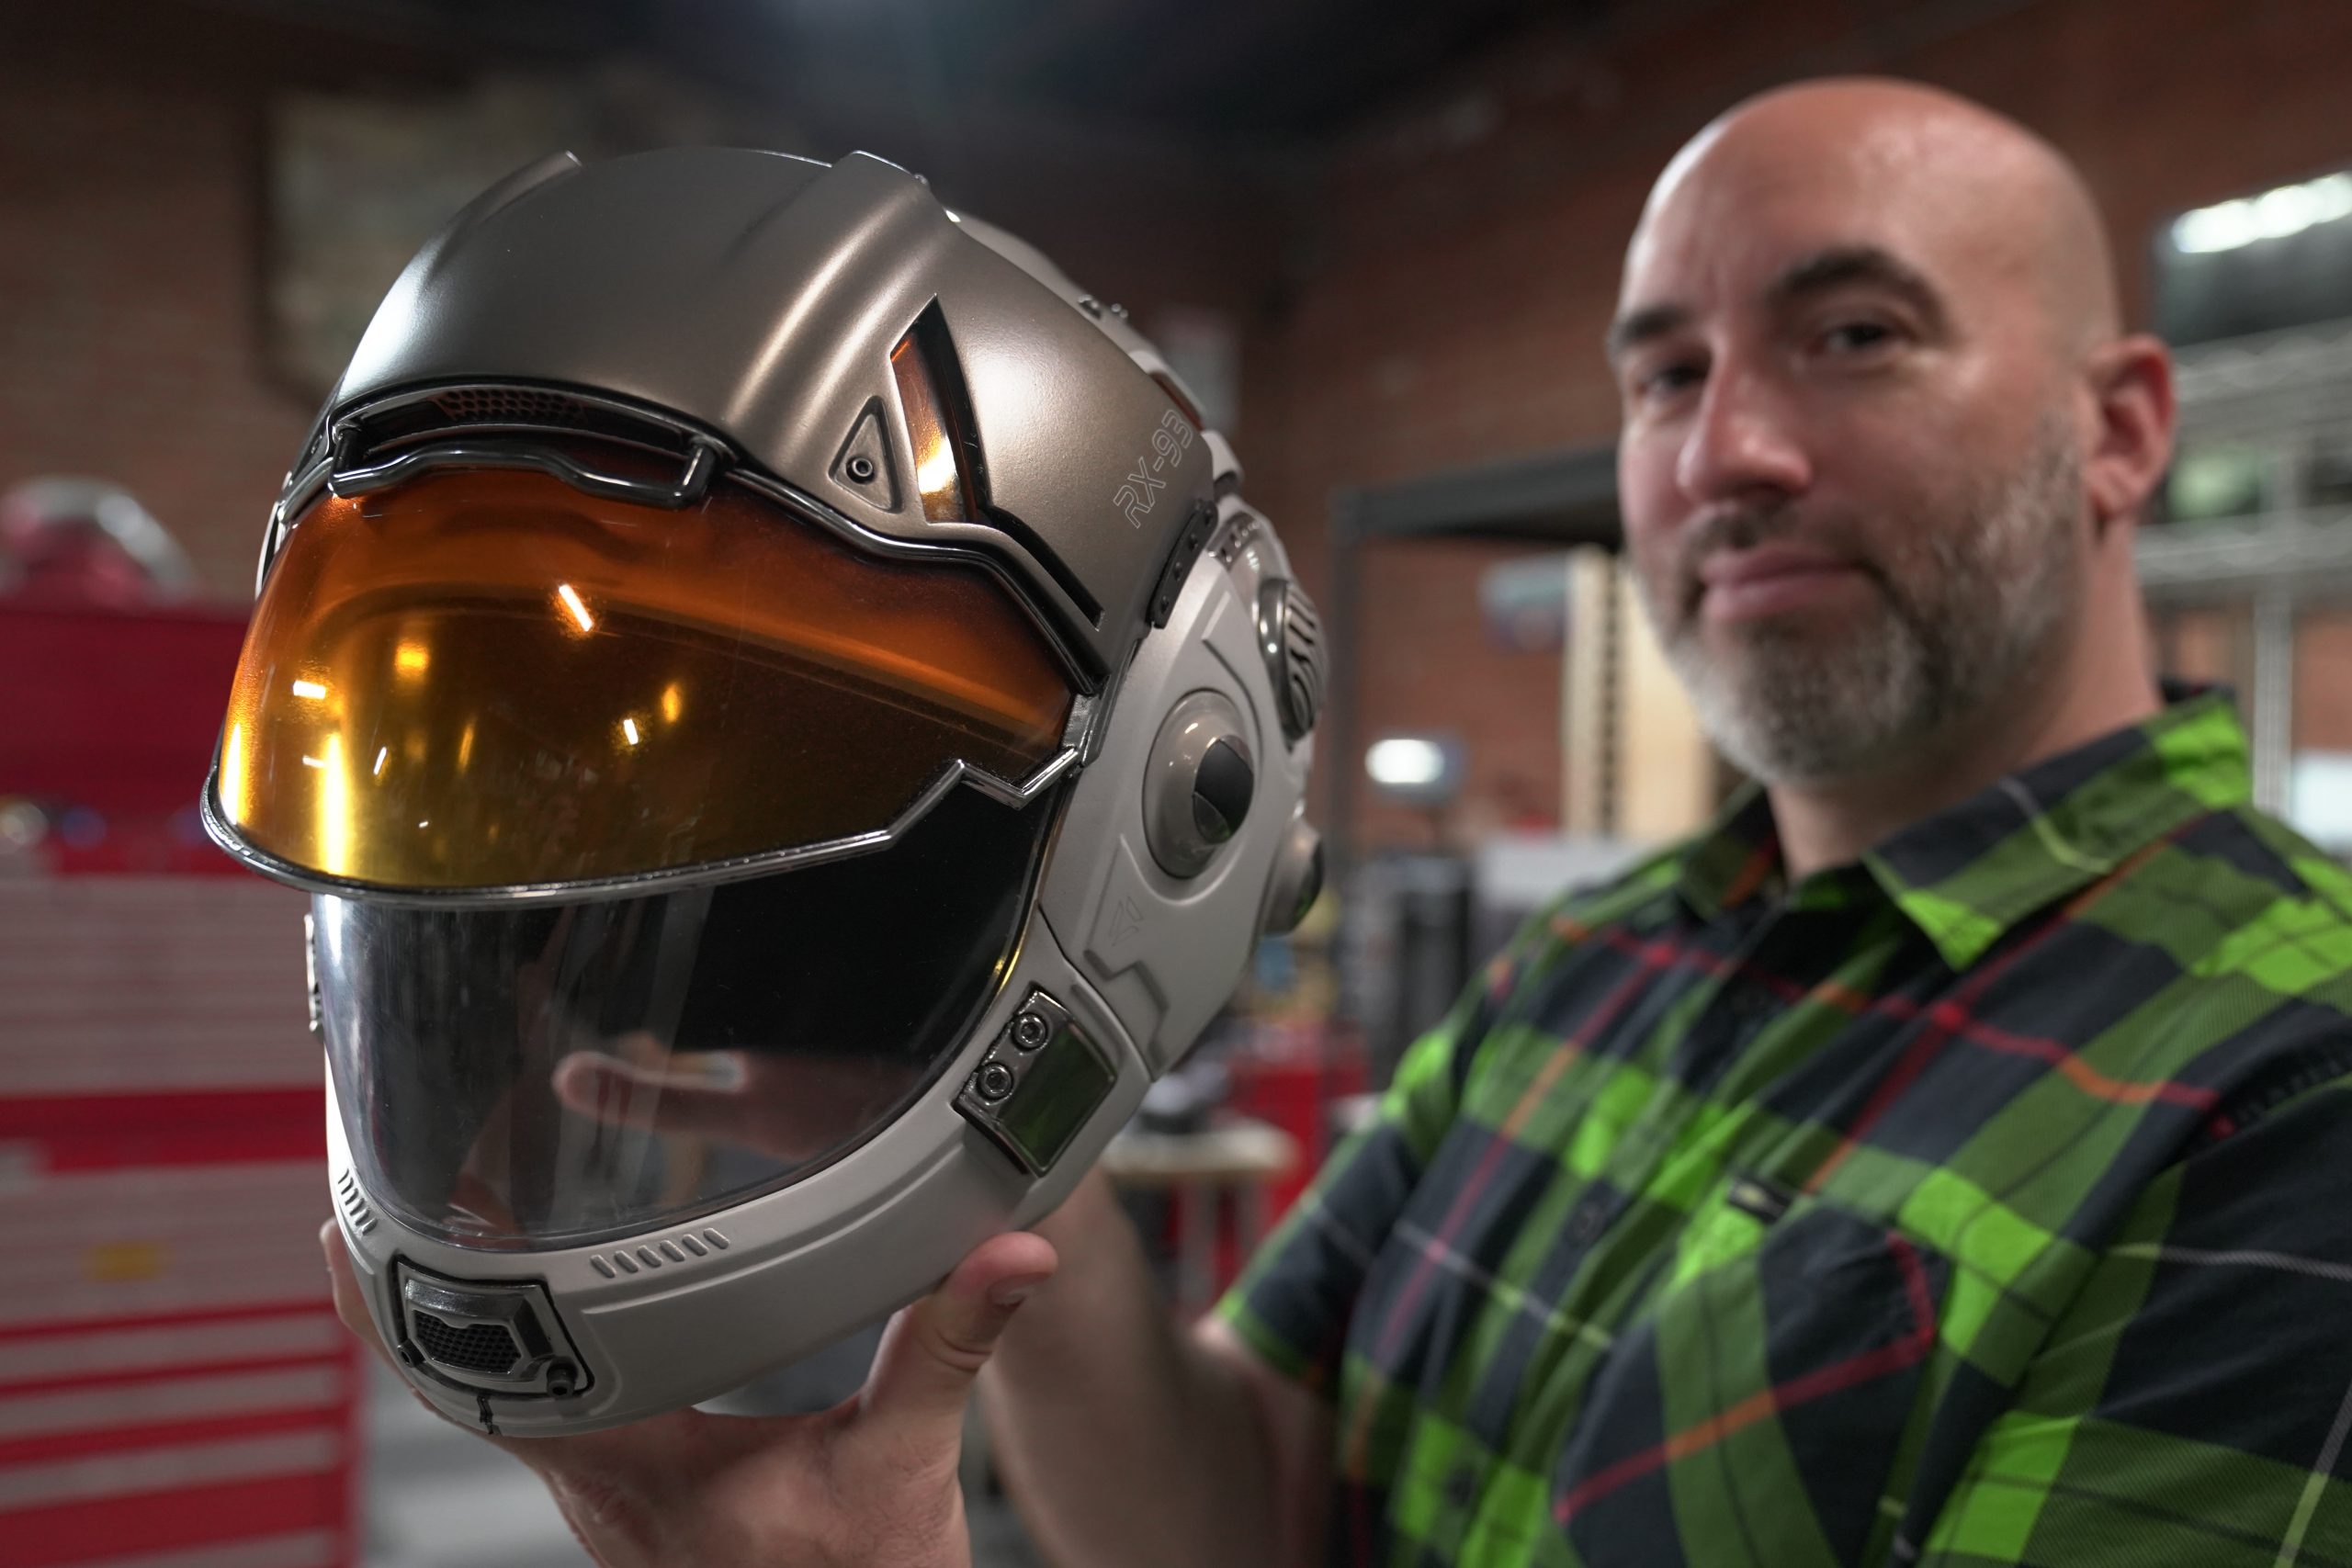 Frank Ippolito of Thingergy holding a Markforged 3D printed space helmet prop